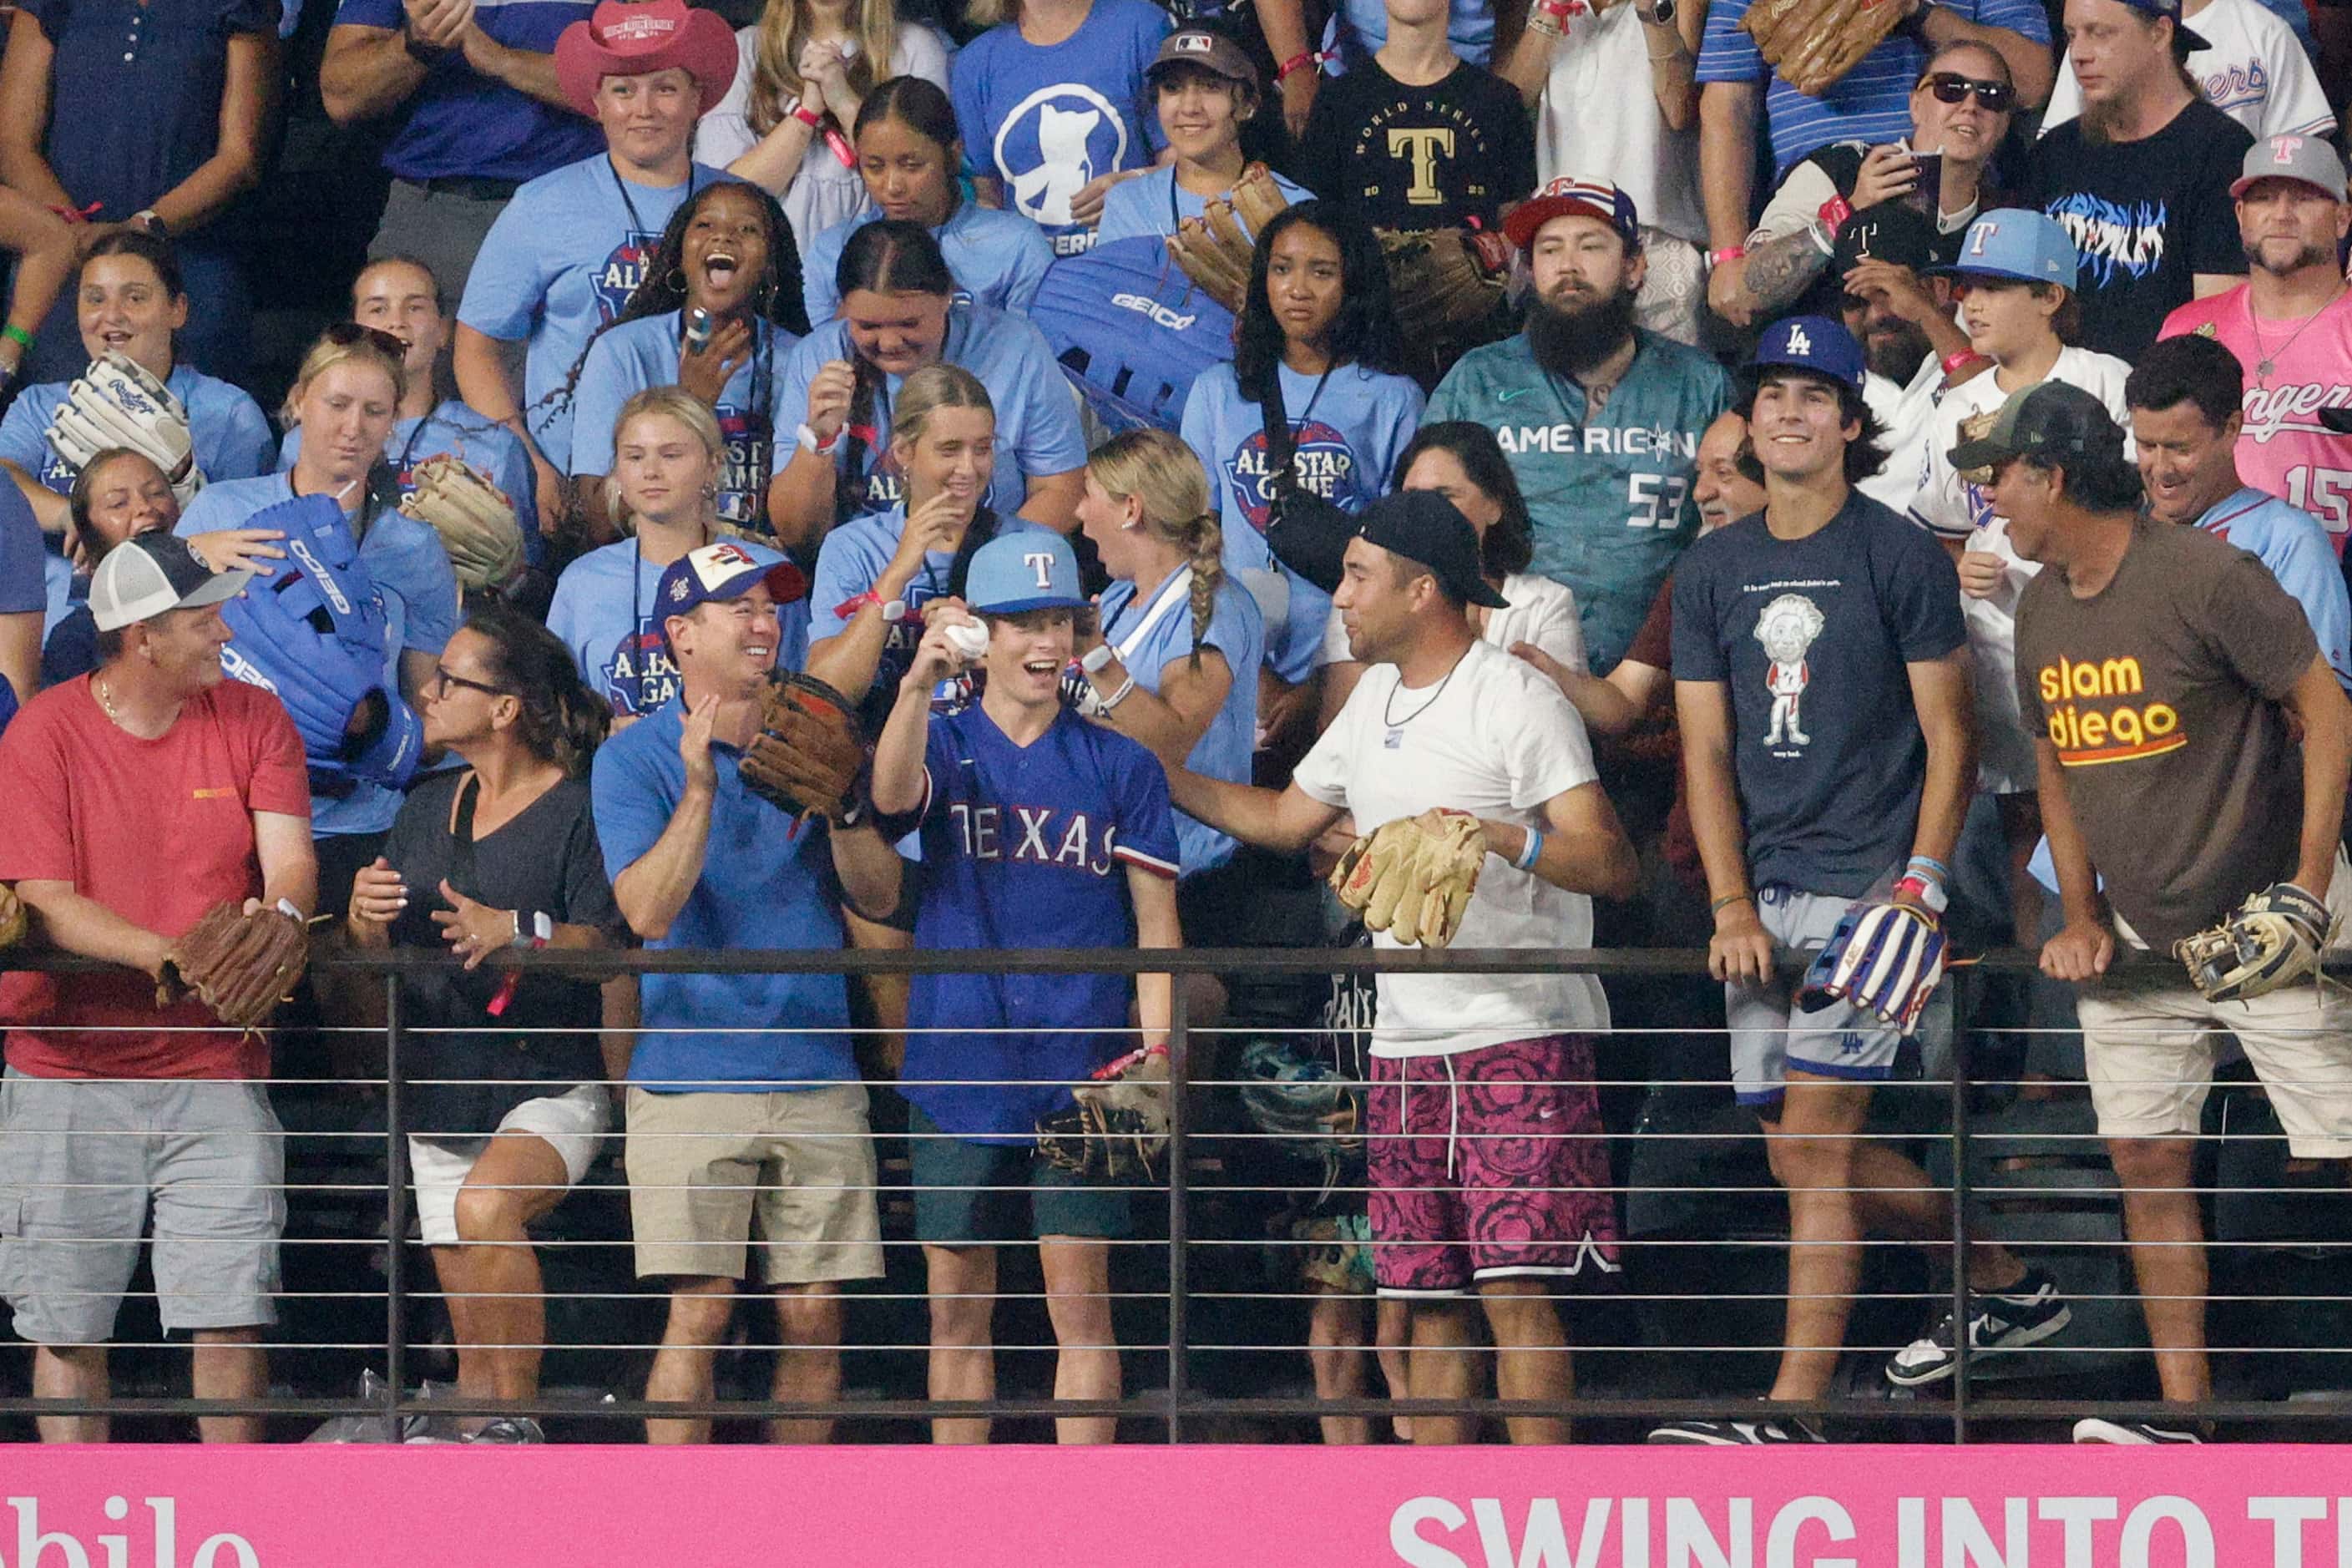 A fan shows a ball after he caught a ball hit by Alec Bohm of Philadelphia Phillies (28)...